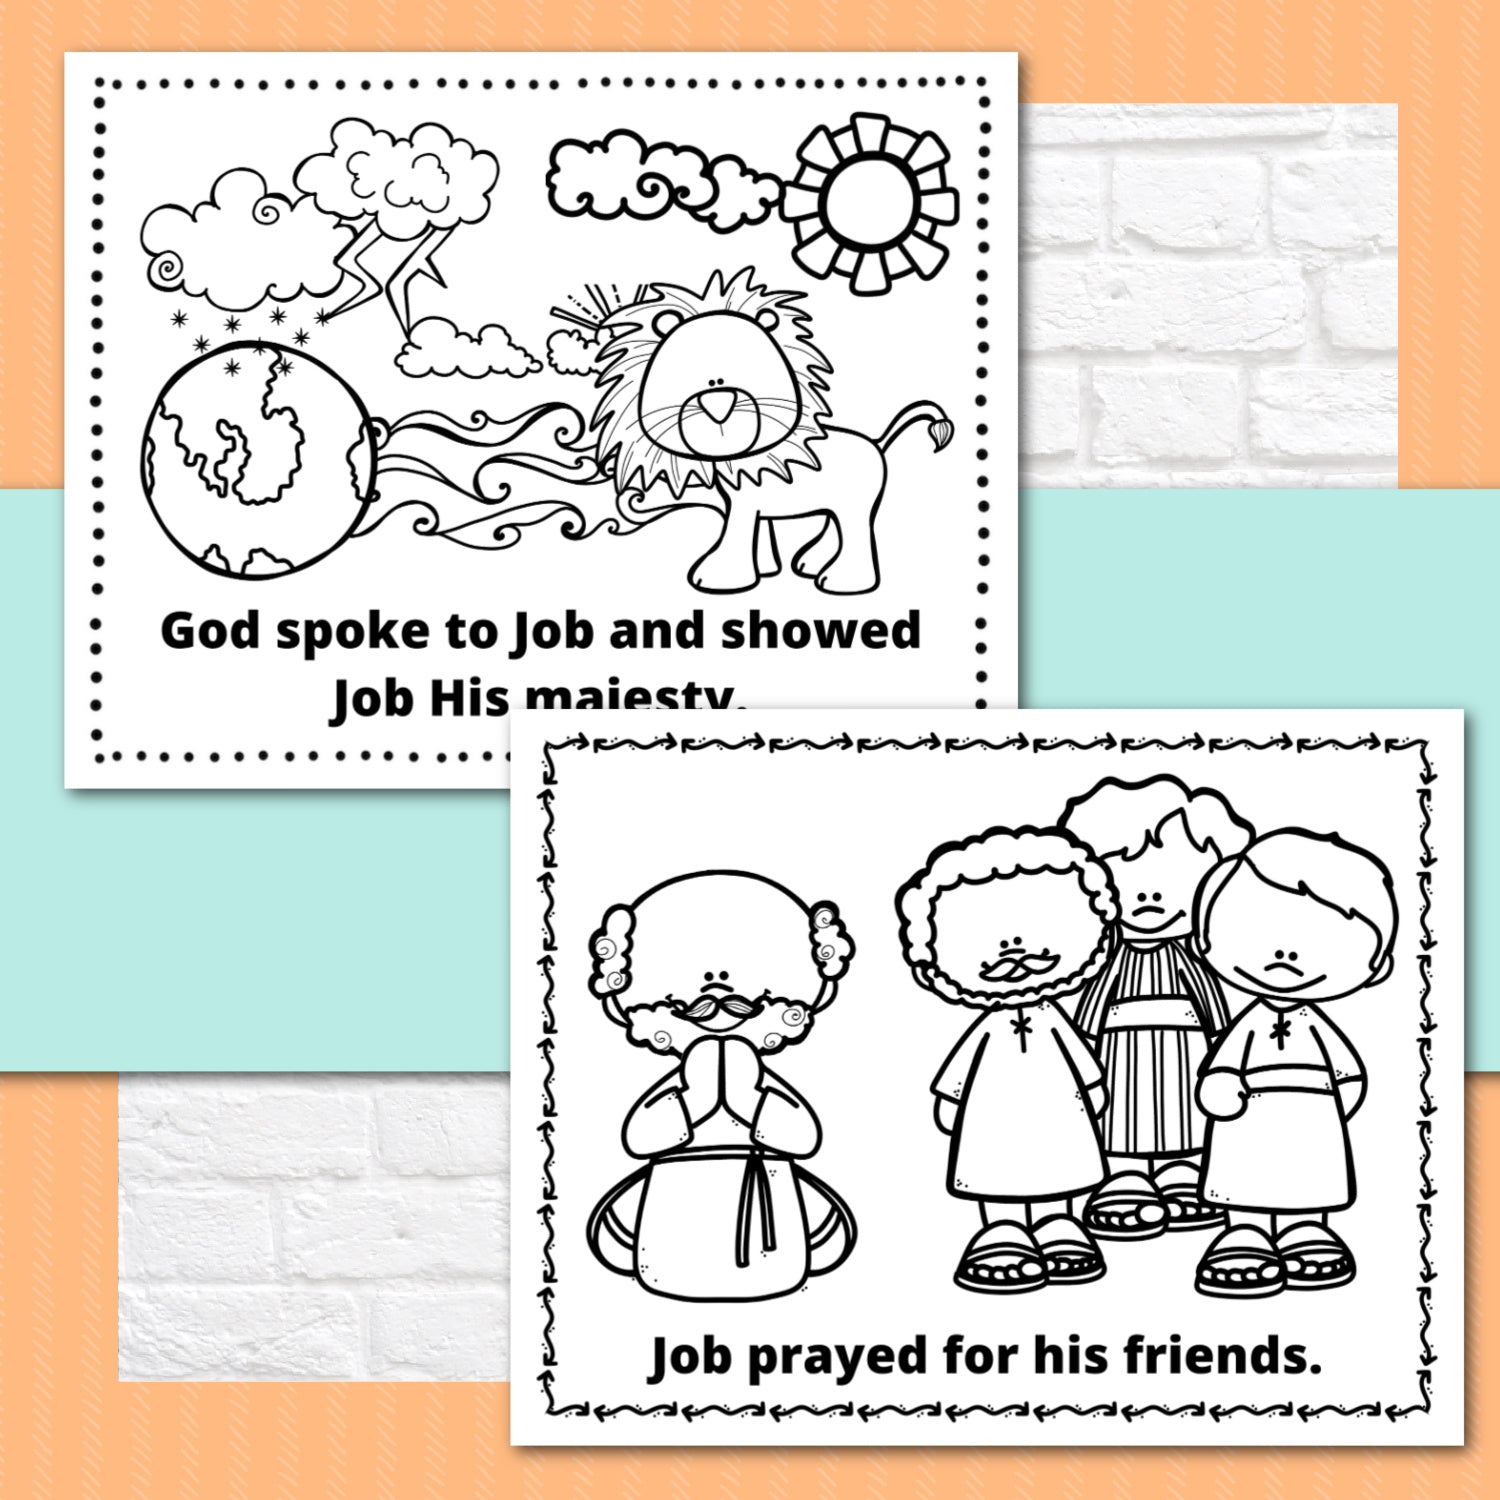 Job bible story activity booklet pages